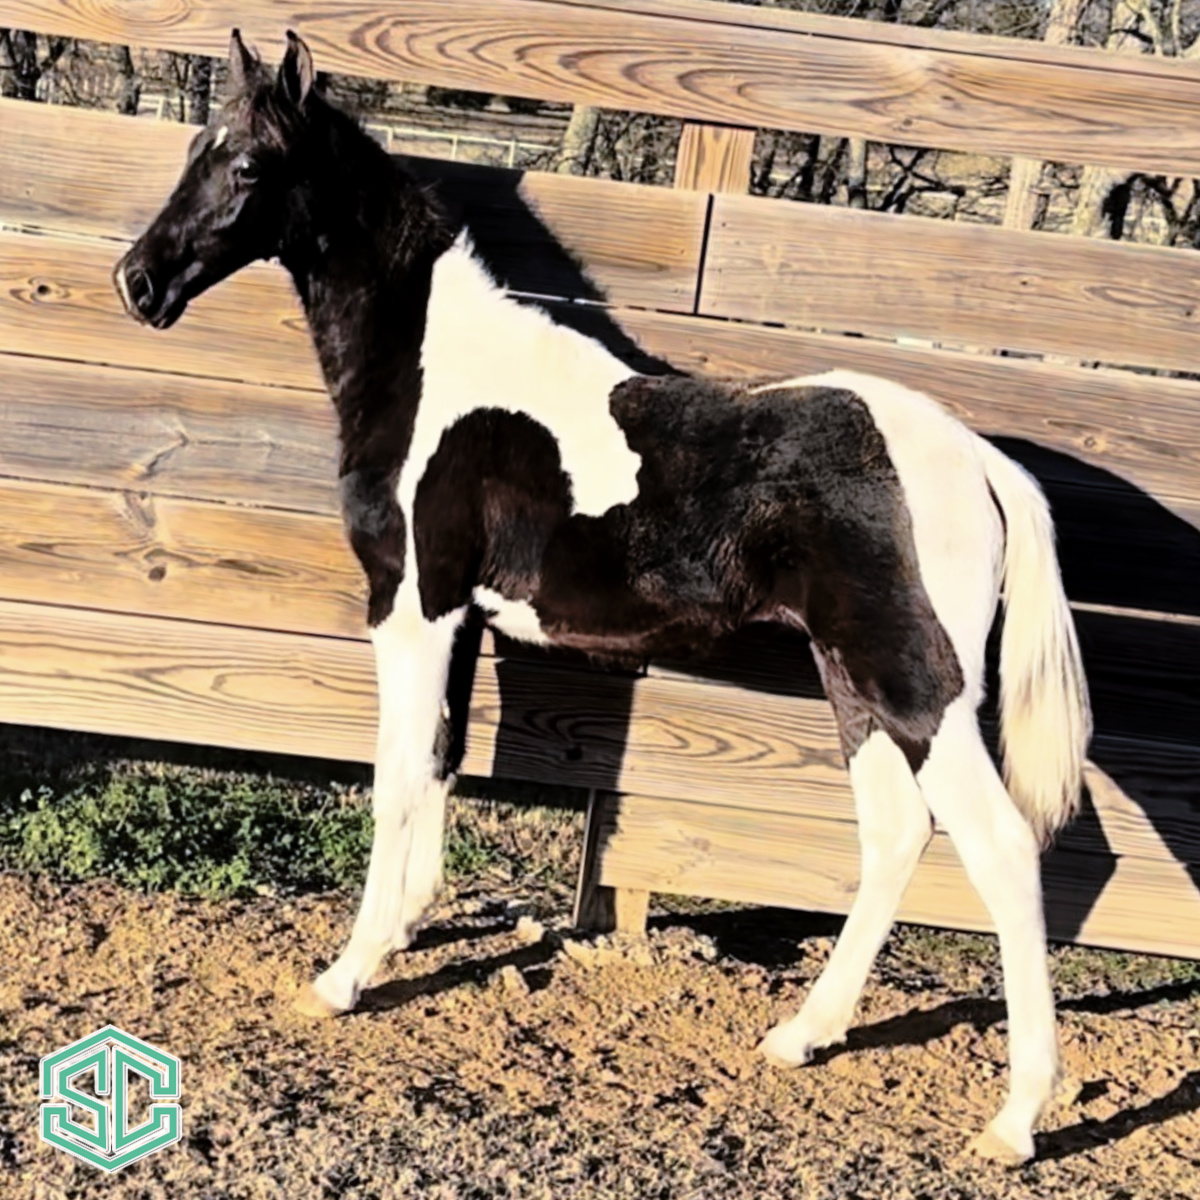 67) MILK SHAKE 22301355 – A World Famous Tobiano son of Hytone’s Match ...